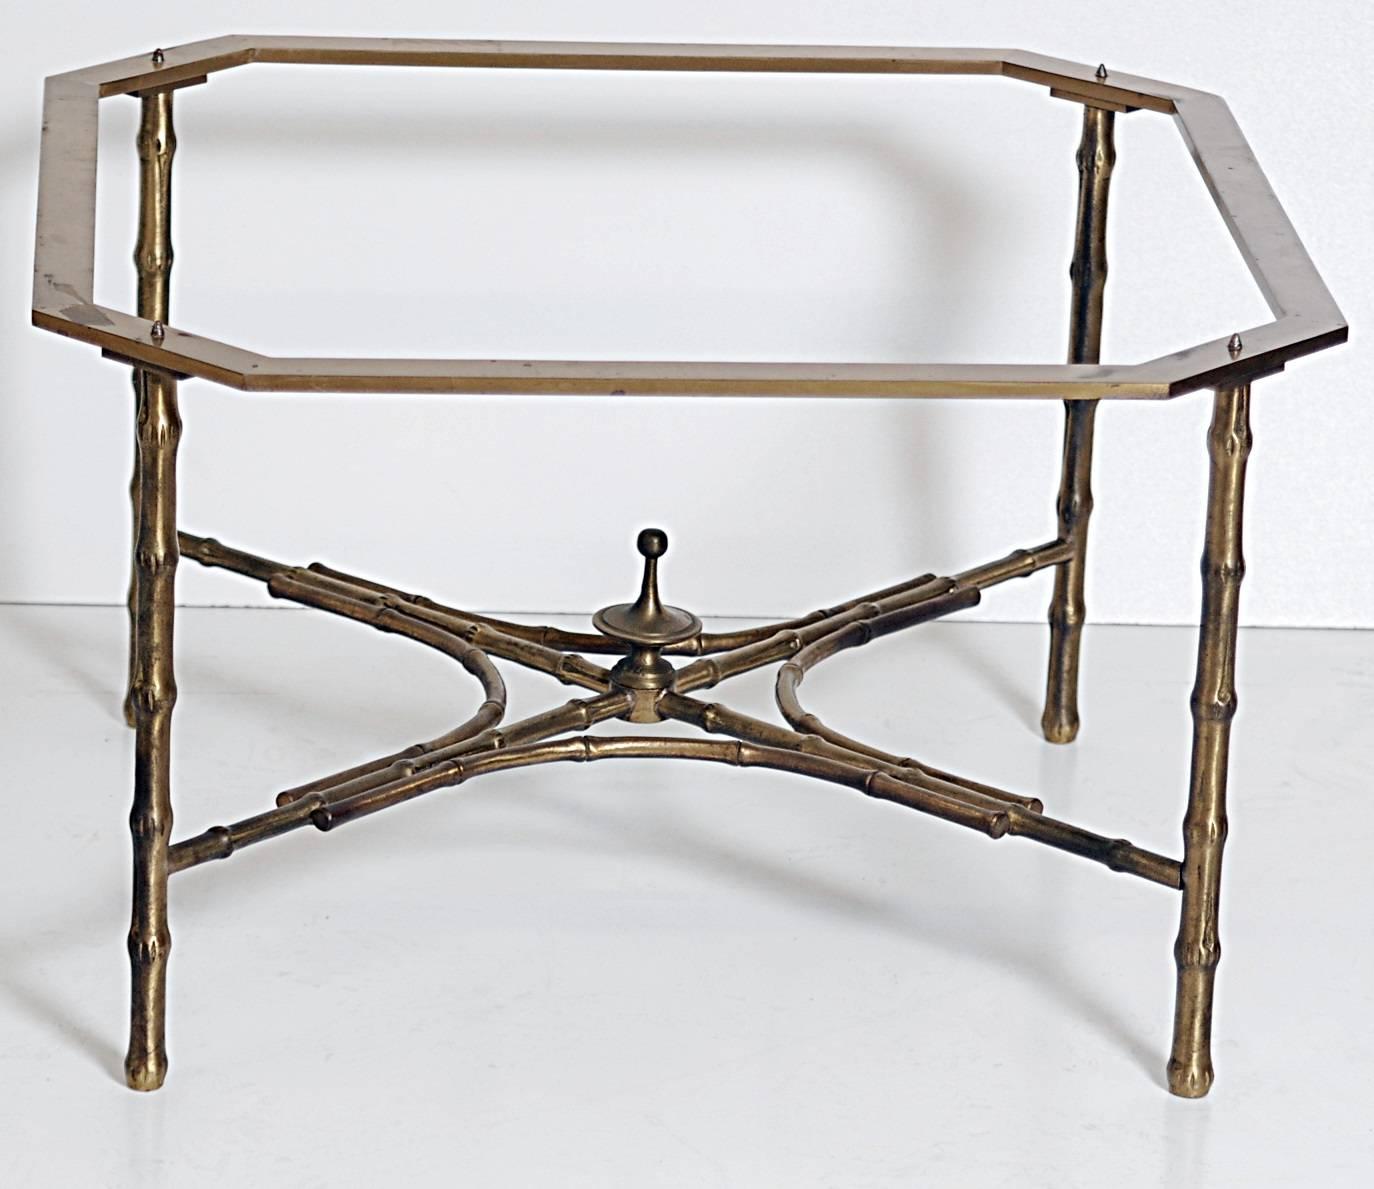 Bronze bamboo form base coffee table with a plate glass top.